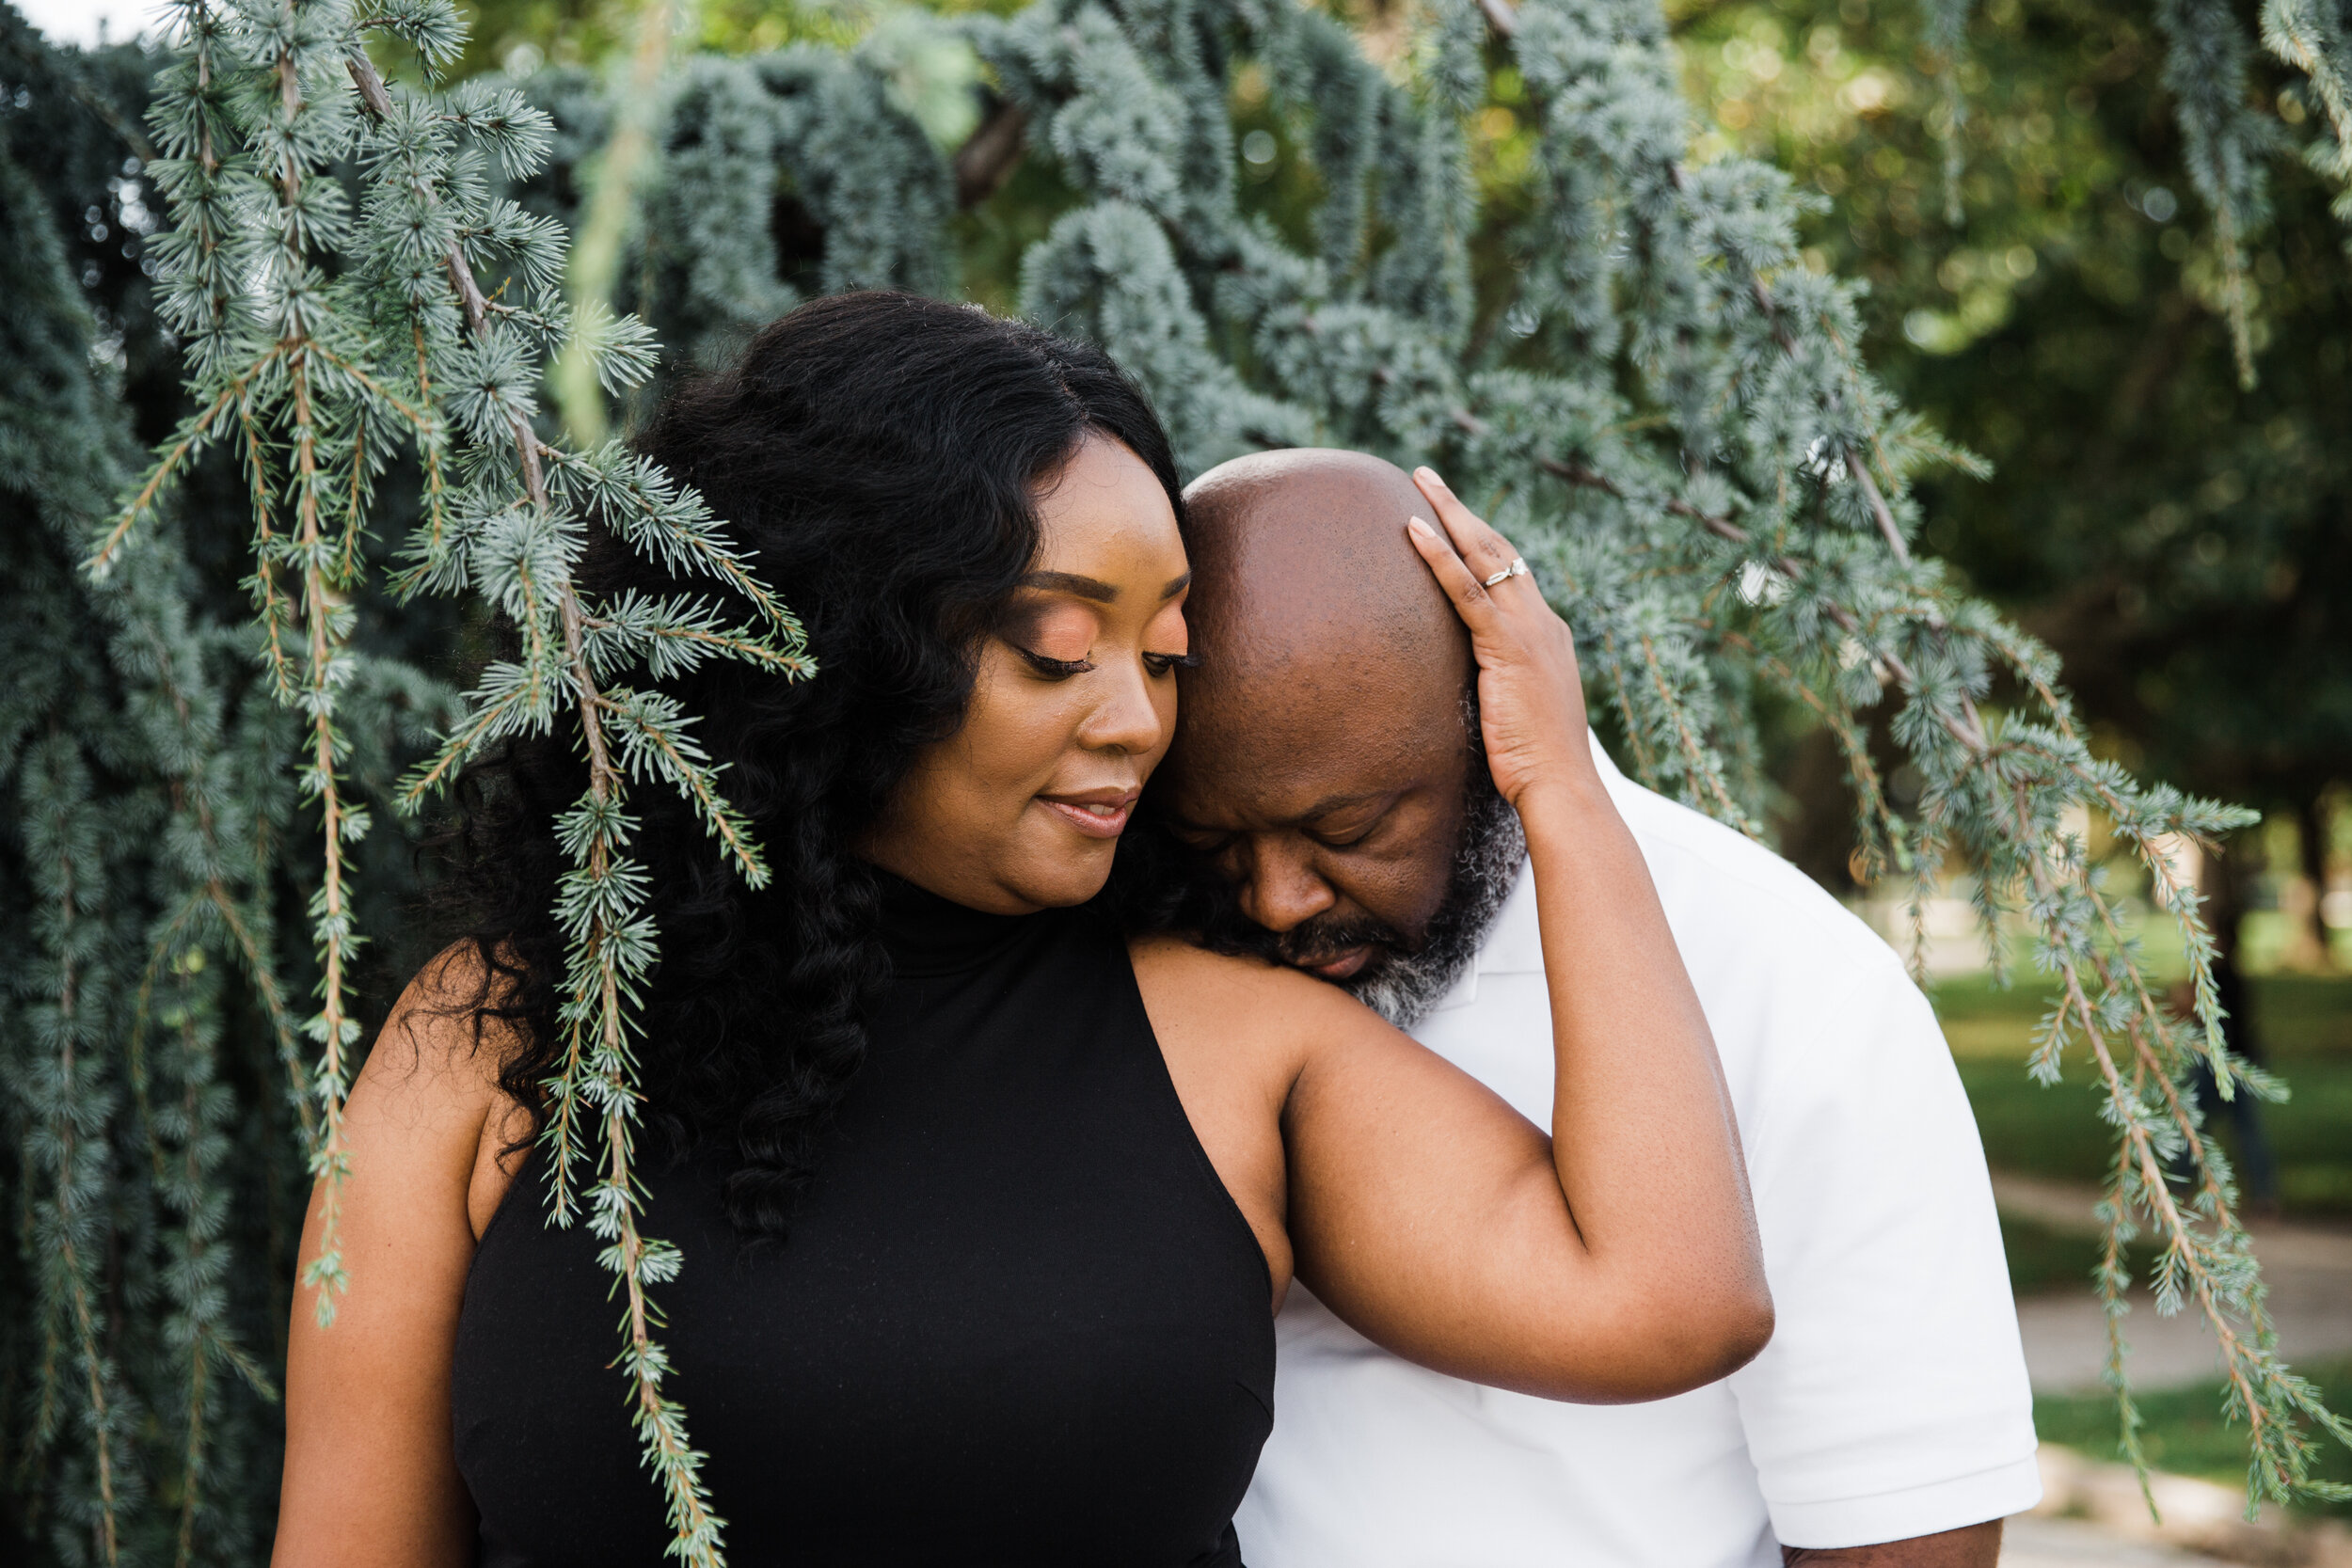 Patterson Park Engagement Session with Black Photographers Megapixels media in Baltimore Maryland (13 of 32).jpg